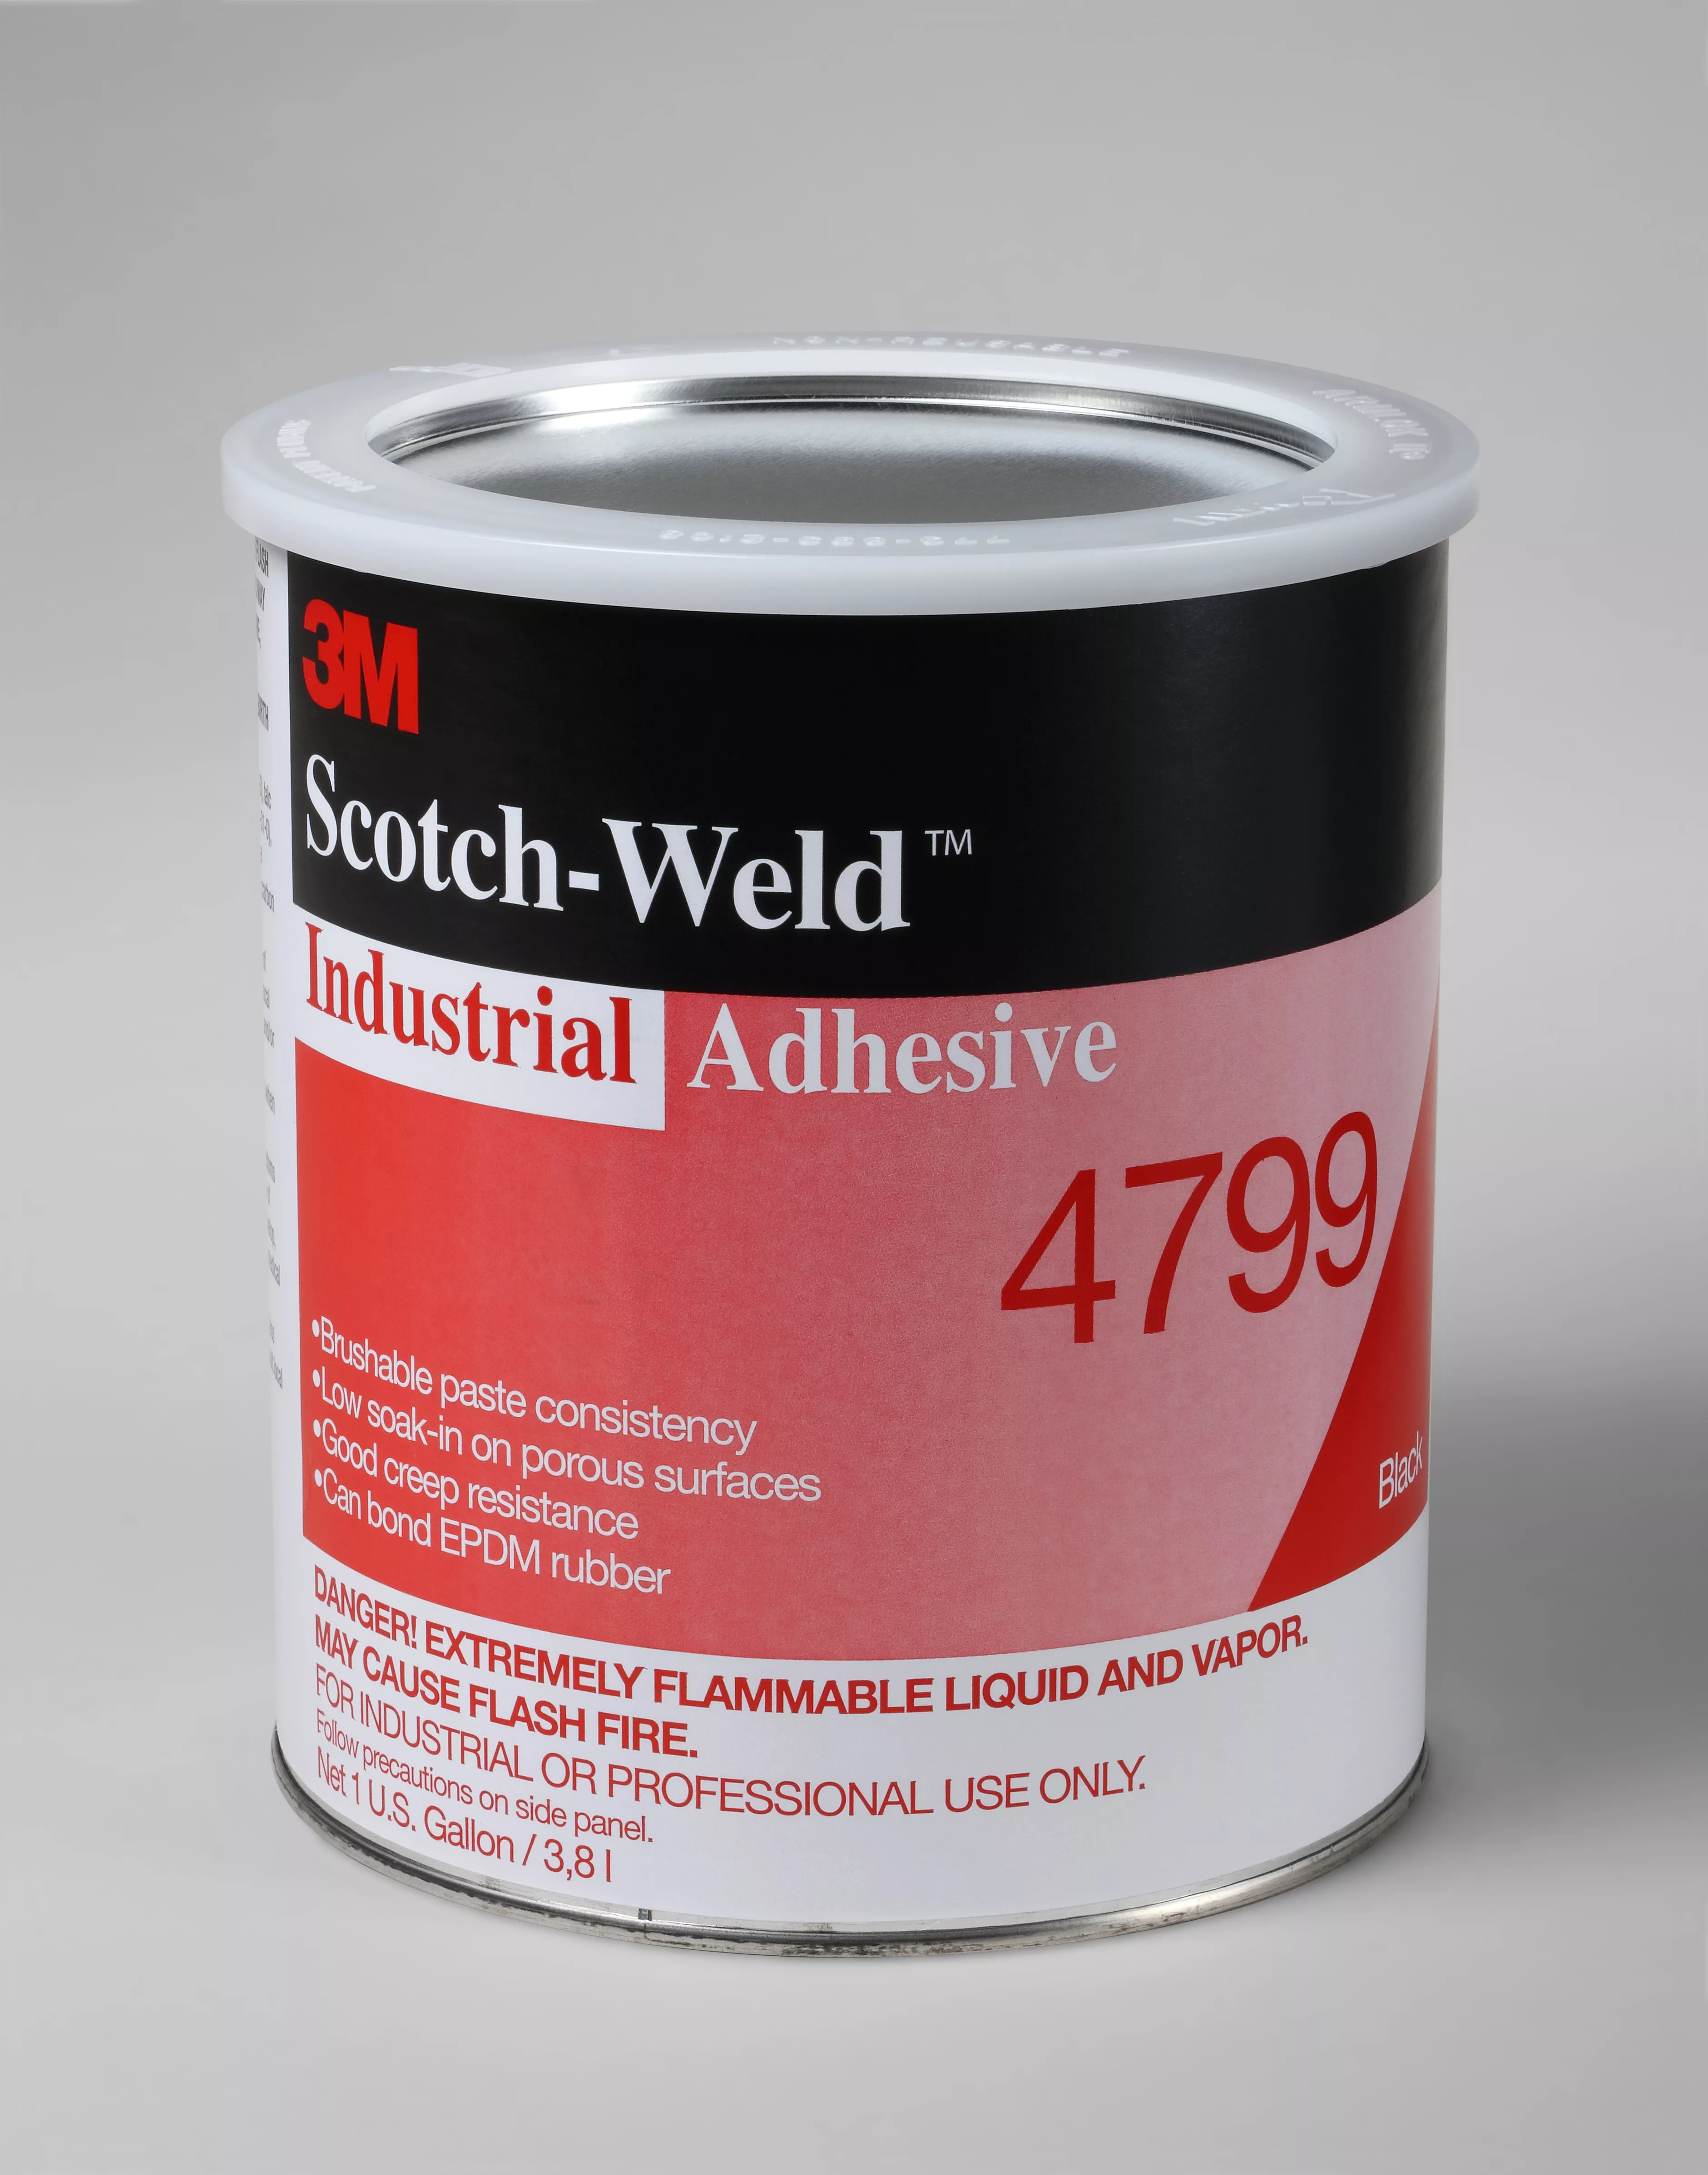 3M™ Industrial Adhesive 4799, Black, 1 Gallon, 4 Can/Case